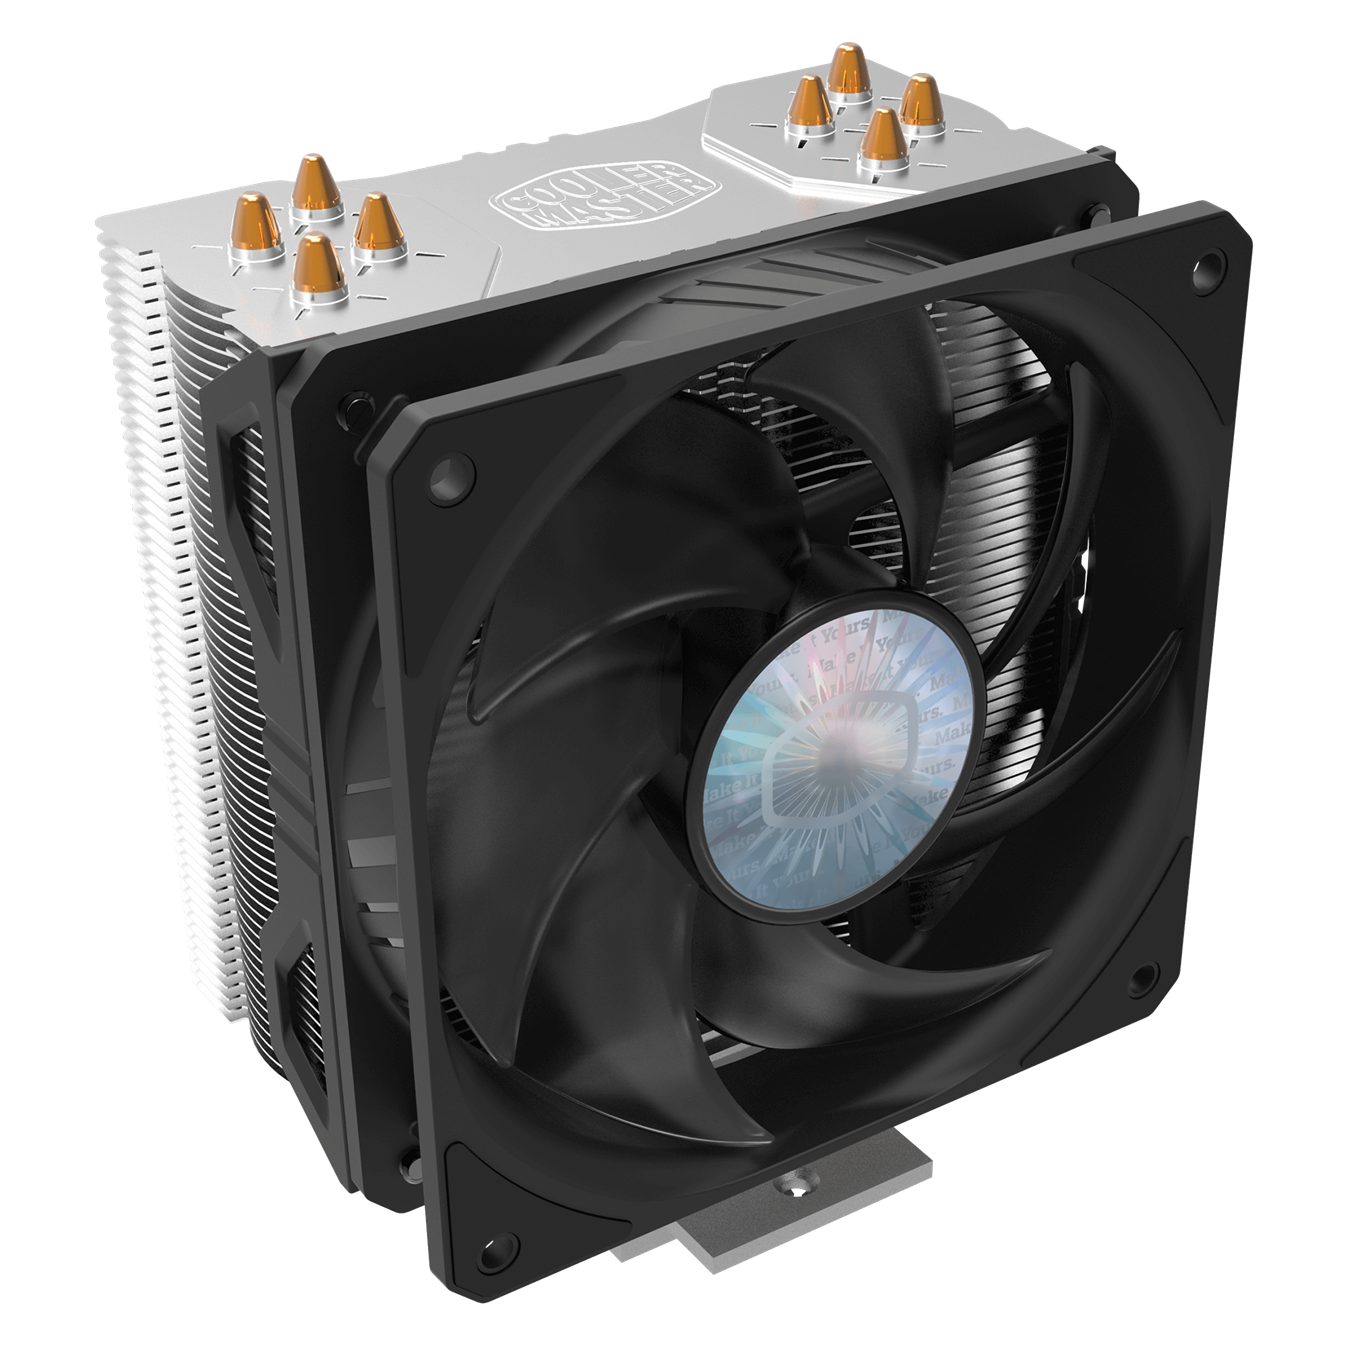 Hyper 212 EVO V2 - Positioned in a 45-degree angle and surrounding the heatpipe